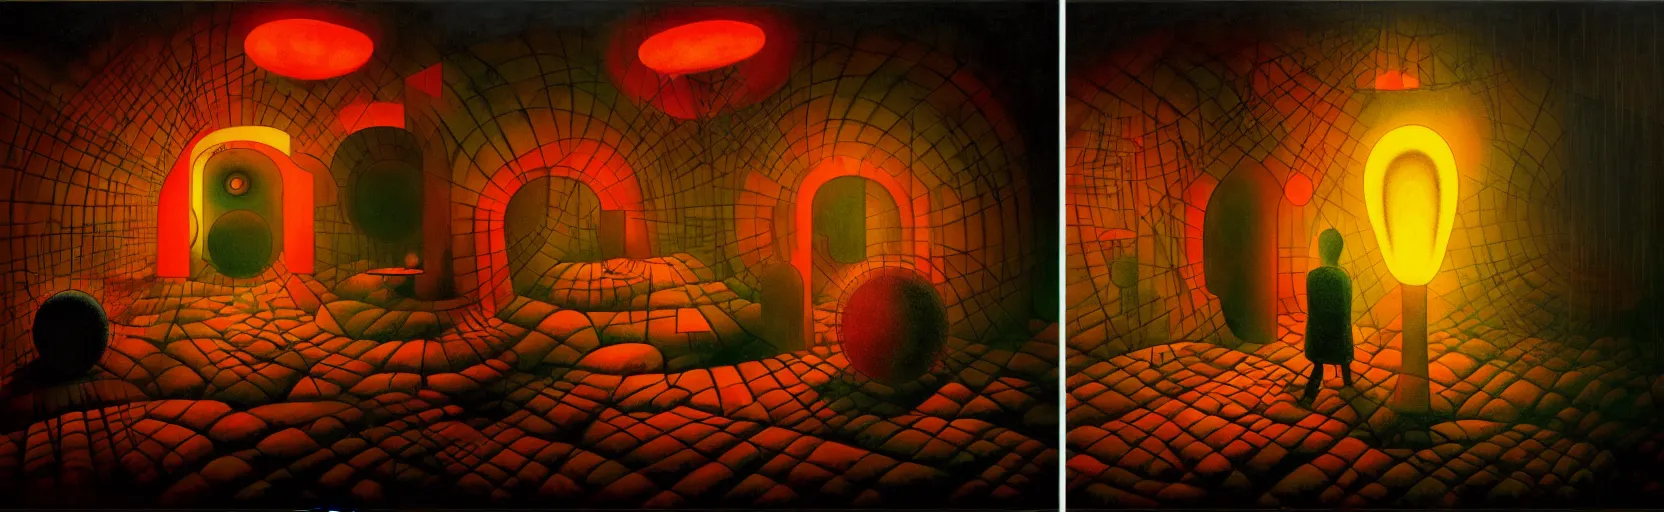 Prompt: hedonic treadmill, dark uncanny surreal painting by ronny khalil, shaun tan, and kandinsky, dramatic lighting from fire glow, mouth of hell, ixions wheel